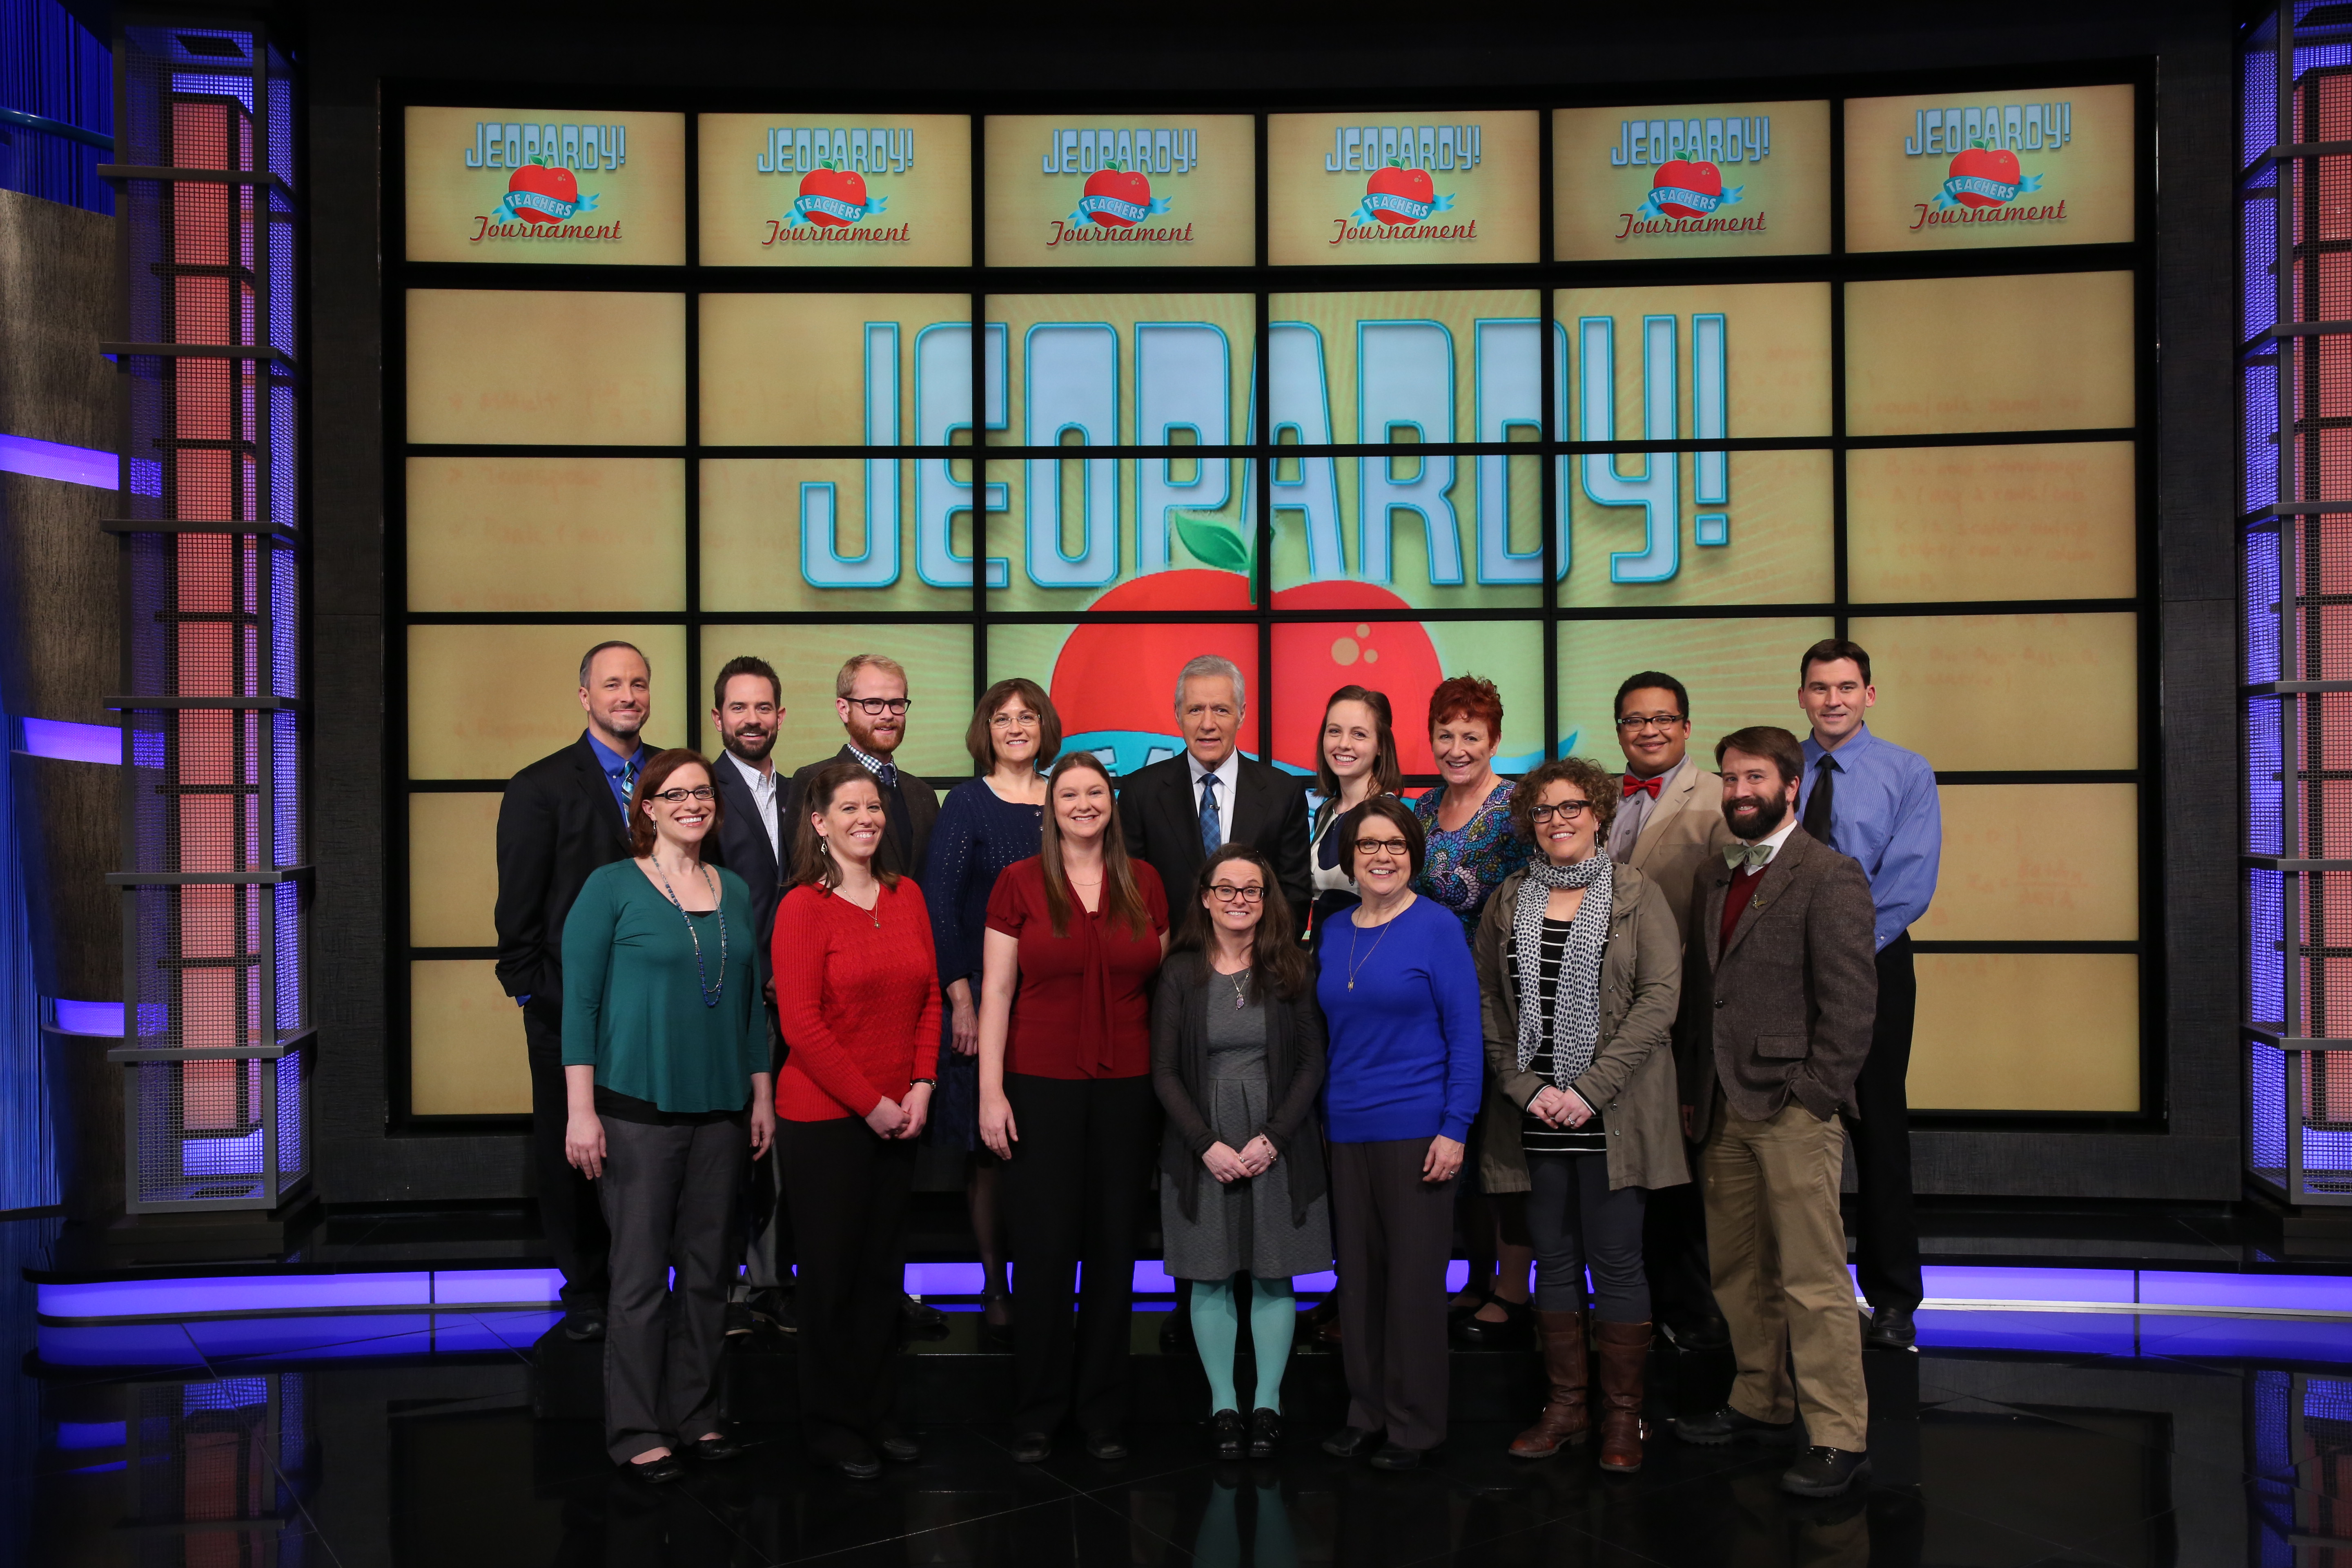 Watch Rego Park woman compete in ‘Jeopardy!’ Teachers Tournament